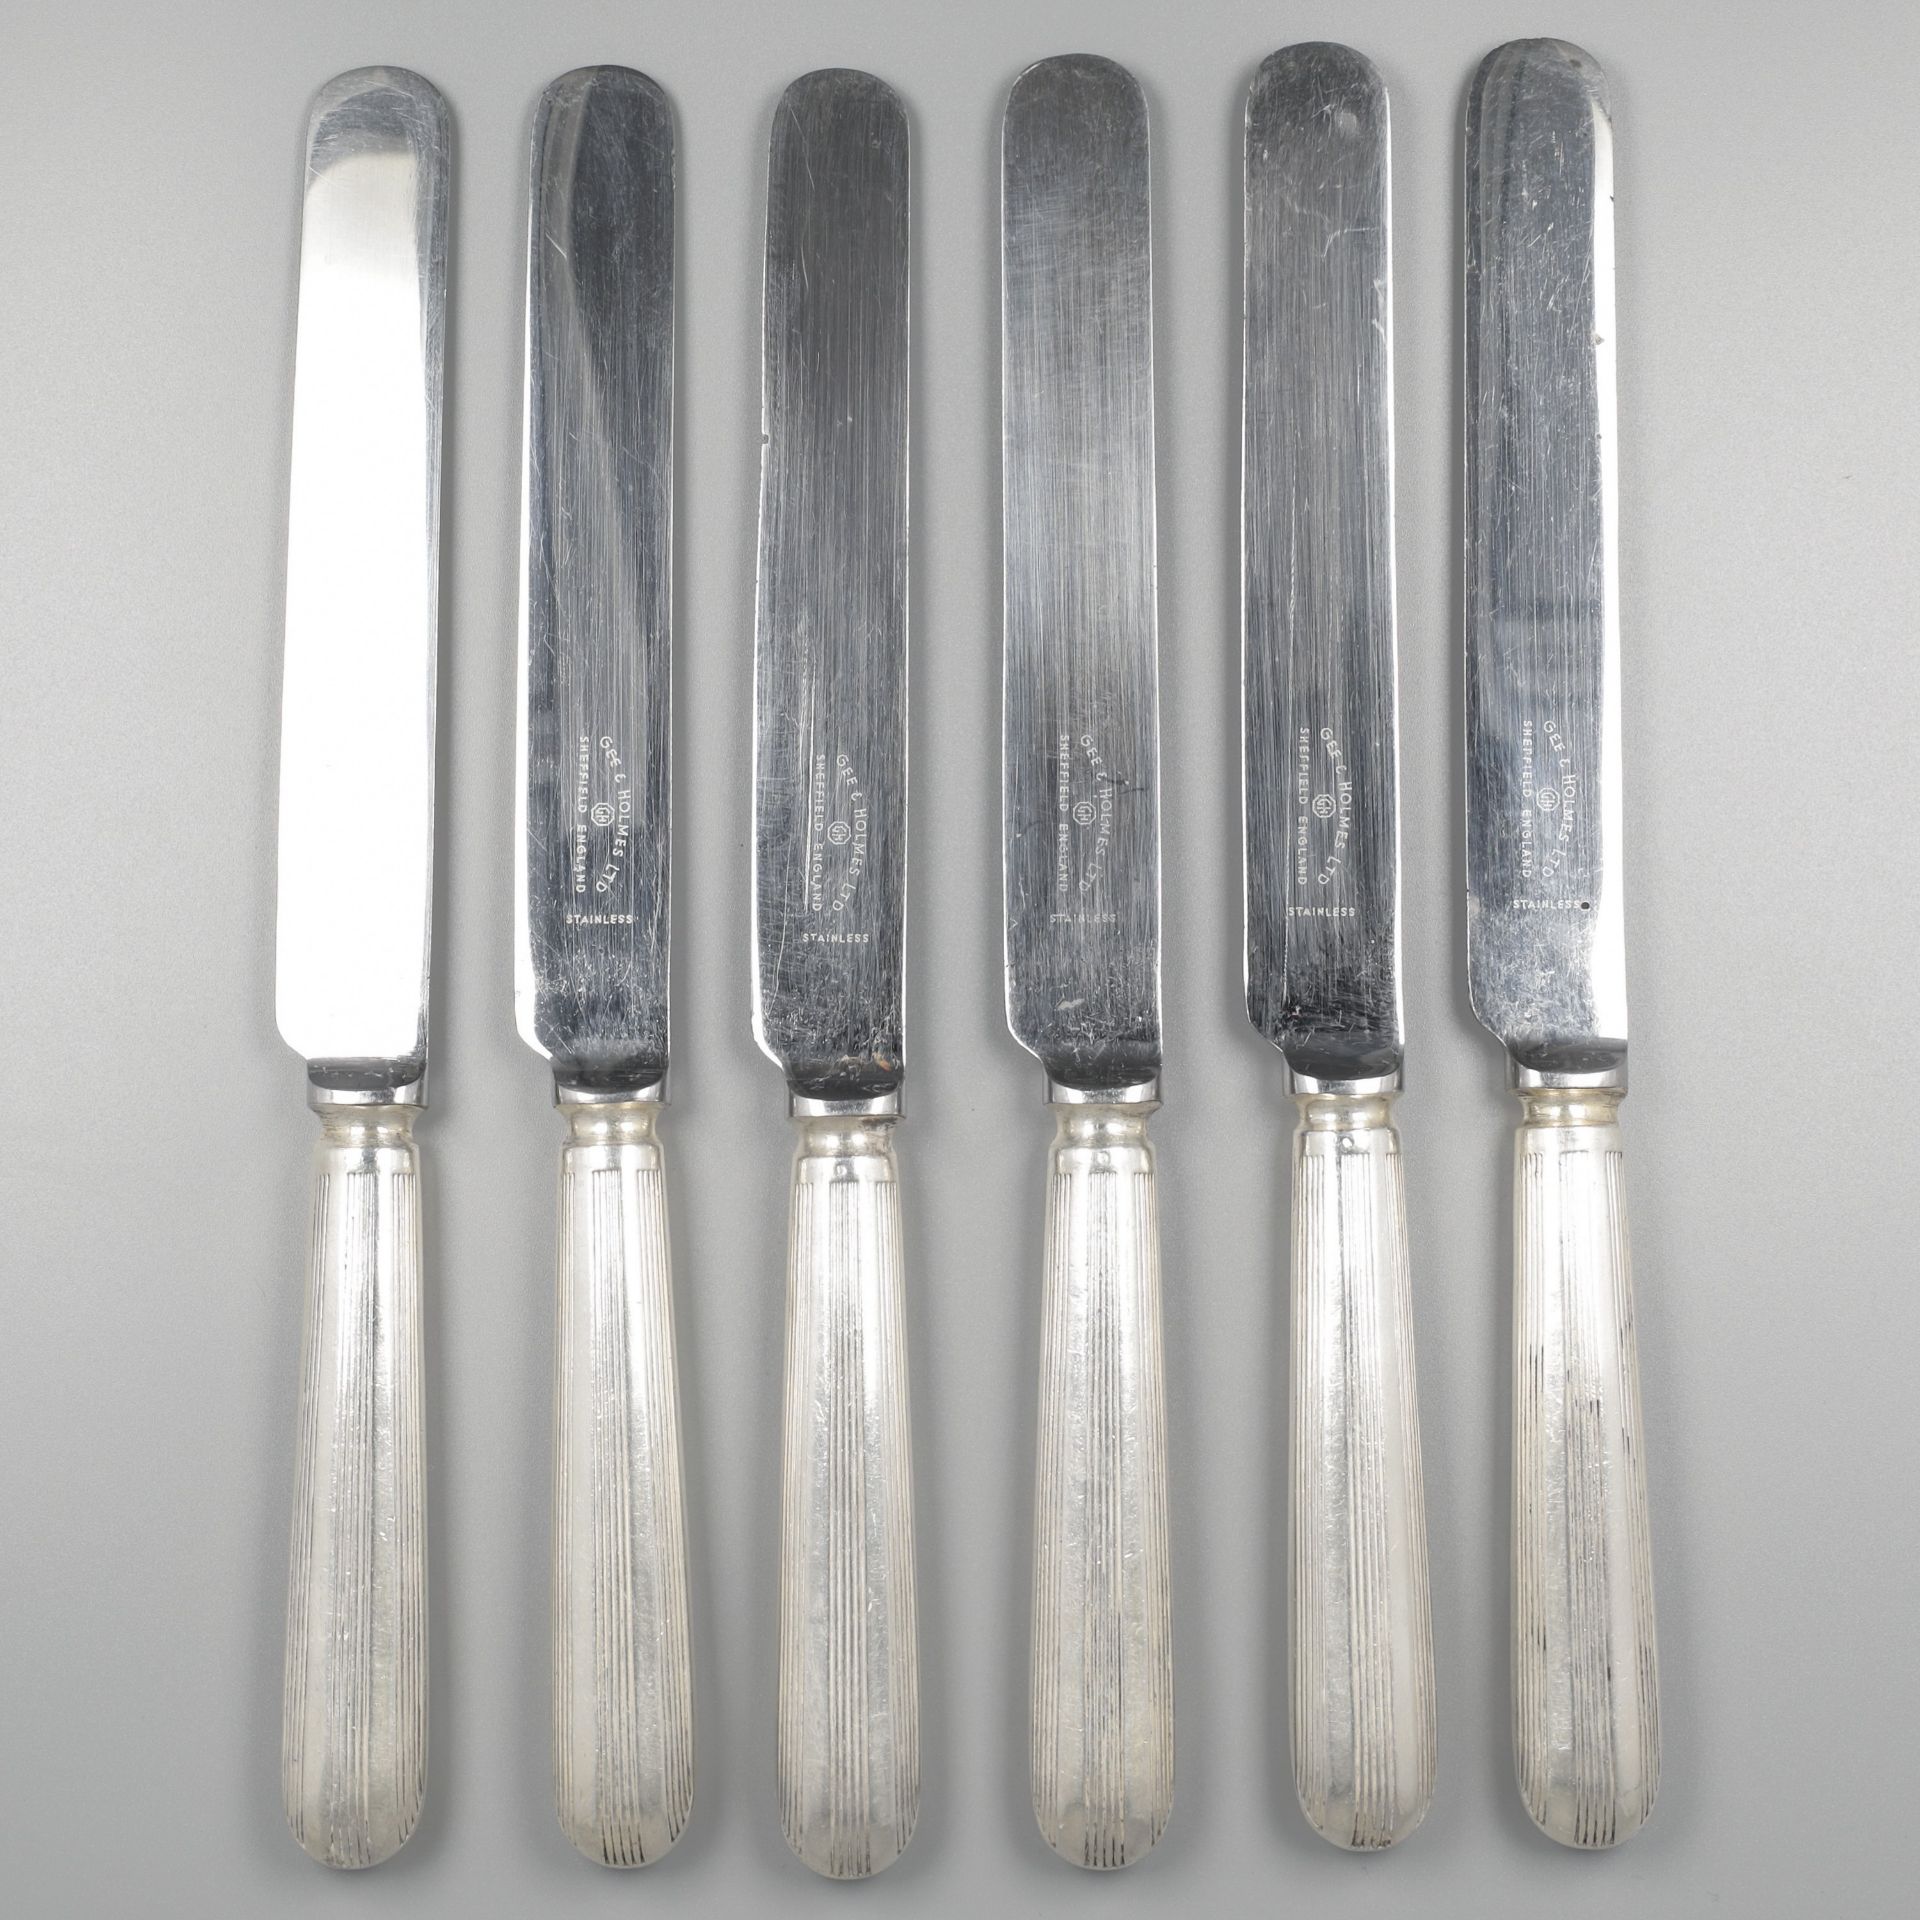 No reserve - 6-piece set of dinner knives silver.